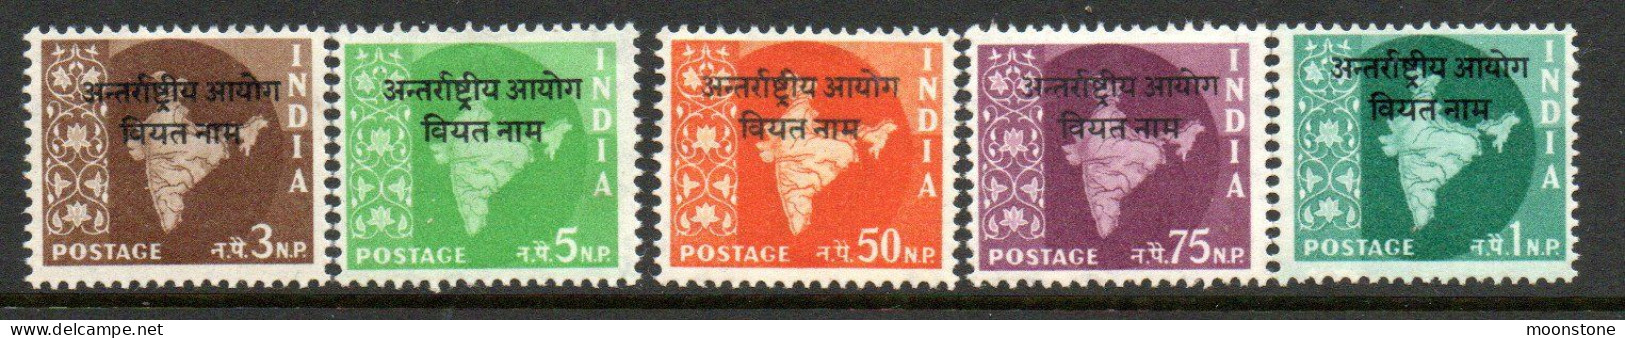 India 1960 Commission In Indochina Vietnam Overprint On Map Part Set Of 5  (missing 2np), MNH, SG N43/8 (E) - Franquicia Militar